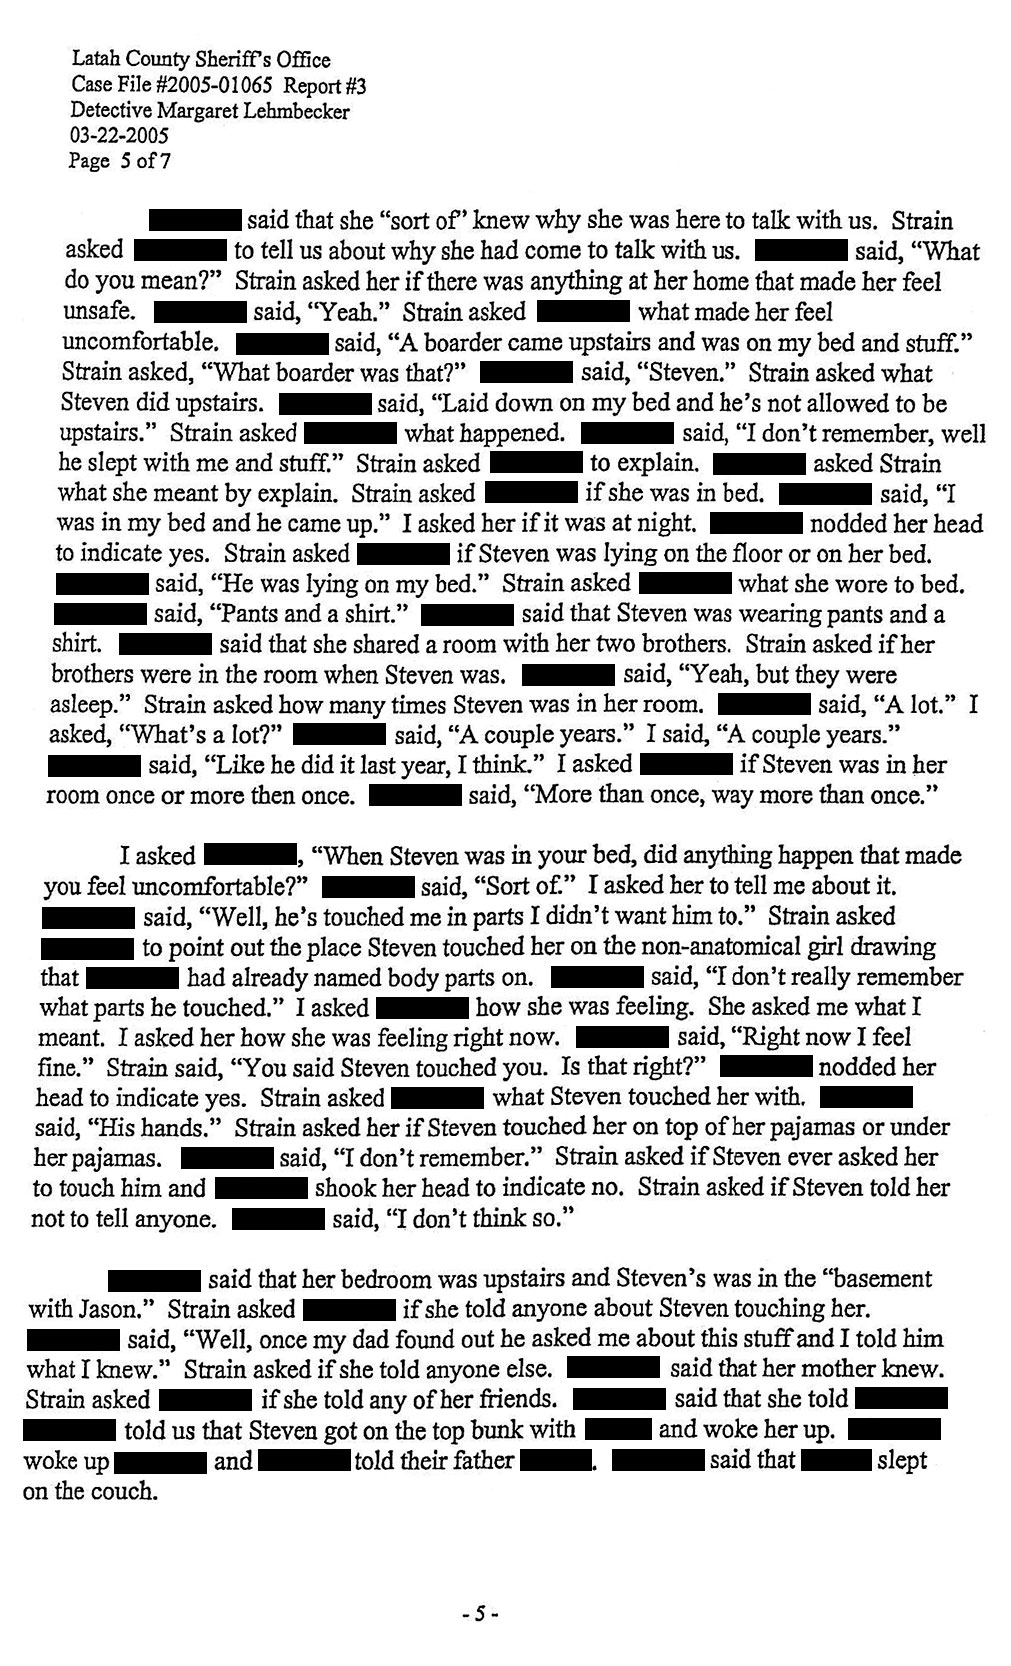 Report #3 page 5 of 7: “More than once, way more than once.”